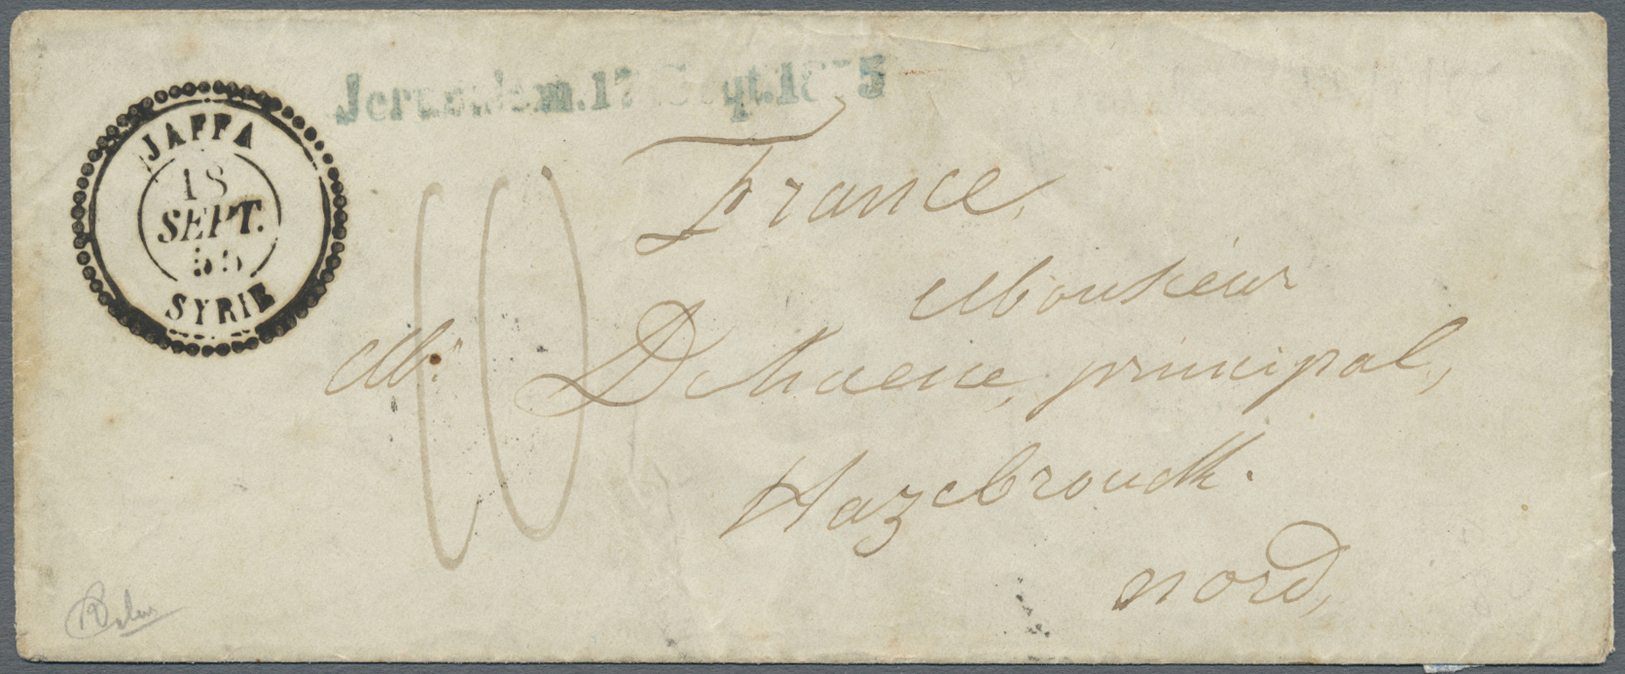 Br Holyland: 1855, "JAFFA SYRIE 18/SEPT/55" Black Cds. Of French Levant Post Office On Small Envelope With Blue Oneliner - Palestine